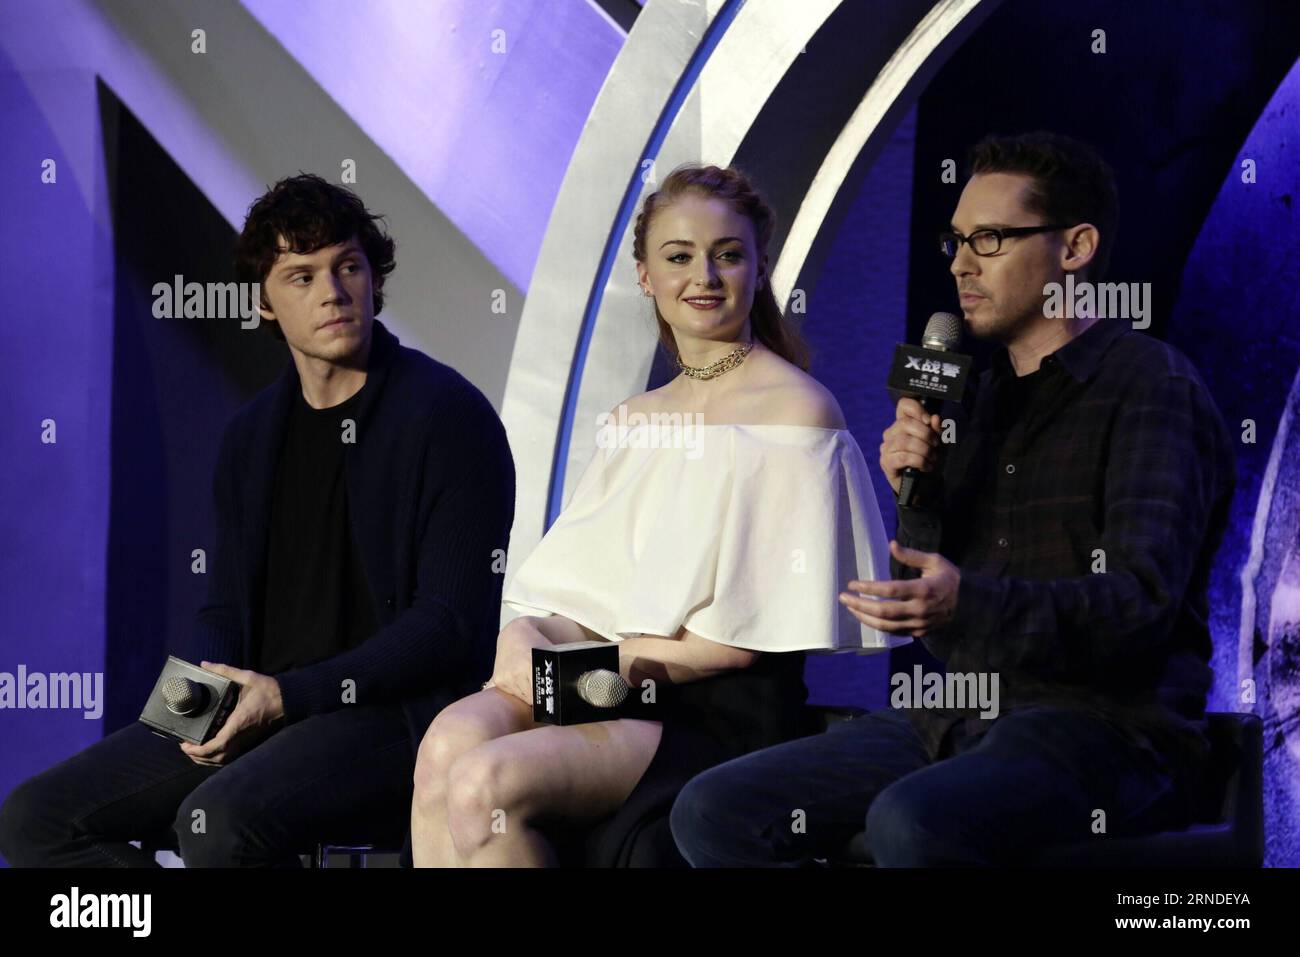 (160518) -- BEIJING, May 18, 2016 () -- Director Bryan Singer (R), actor Evan Peters (L) and actress Sophie Turner attend a press conference for the film X-Men: Apocalypse in Beijing, capital of China, May 18, 2016. The release date of the film in the Chinese mainland is sheduled on June 3. () (wx) CHINA-BEIJING-FILM X-MEN -PRESS CONFERENCE(CN) Xinhua PUBLICATIONxNOTxINxCHN   160518 Beijing May 18 2016 Director Bryan Singer r Actor Evan Peters l and actress Sophie Turner attend a Press Conference for The Film X Men APOCALYPSE in Beijing Capital of China May 18 2016 The Release Date of The Film Stock Photo